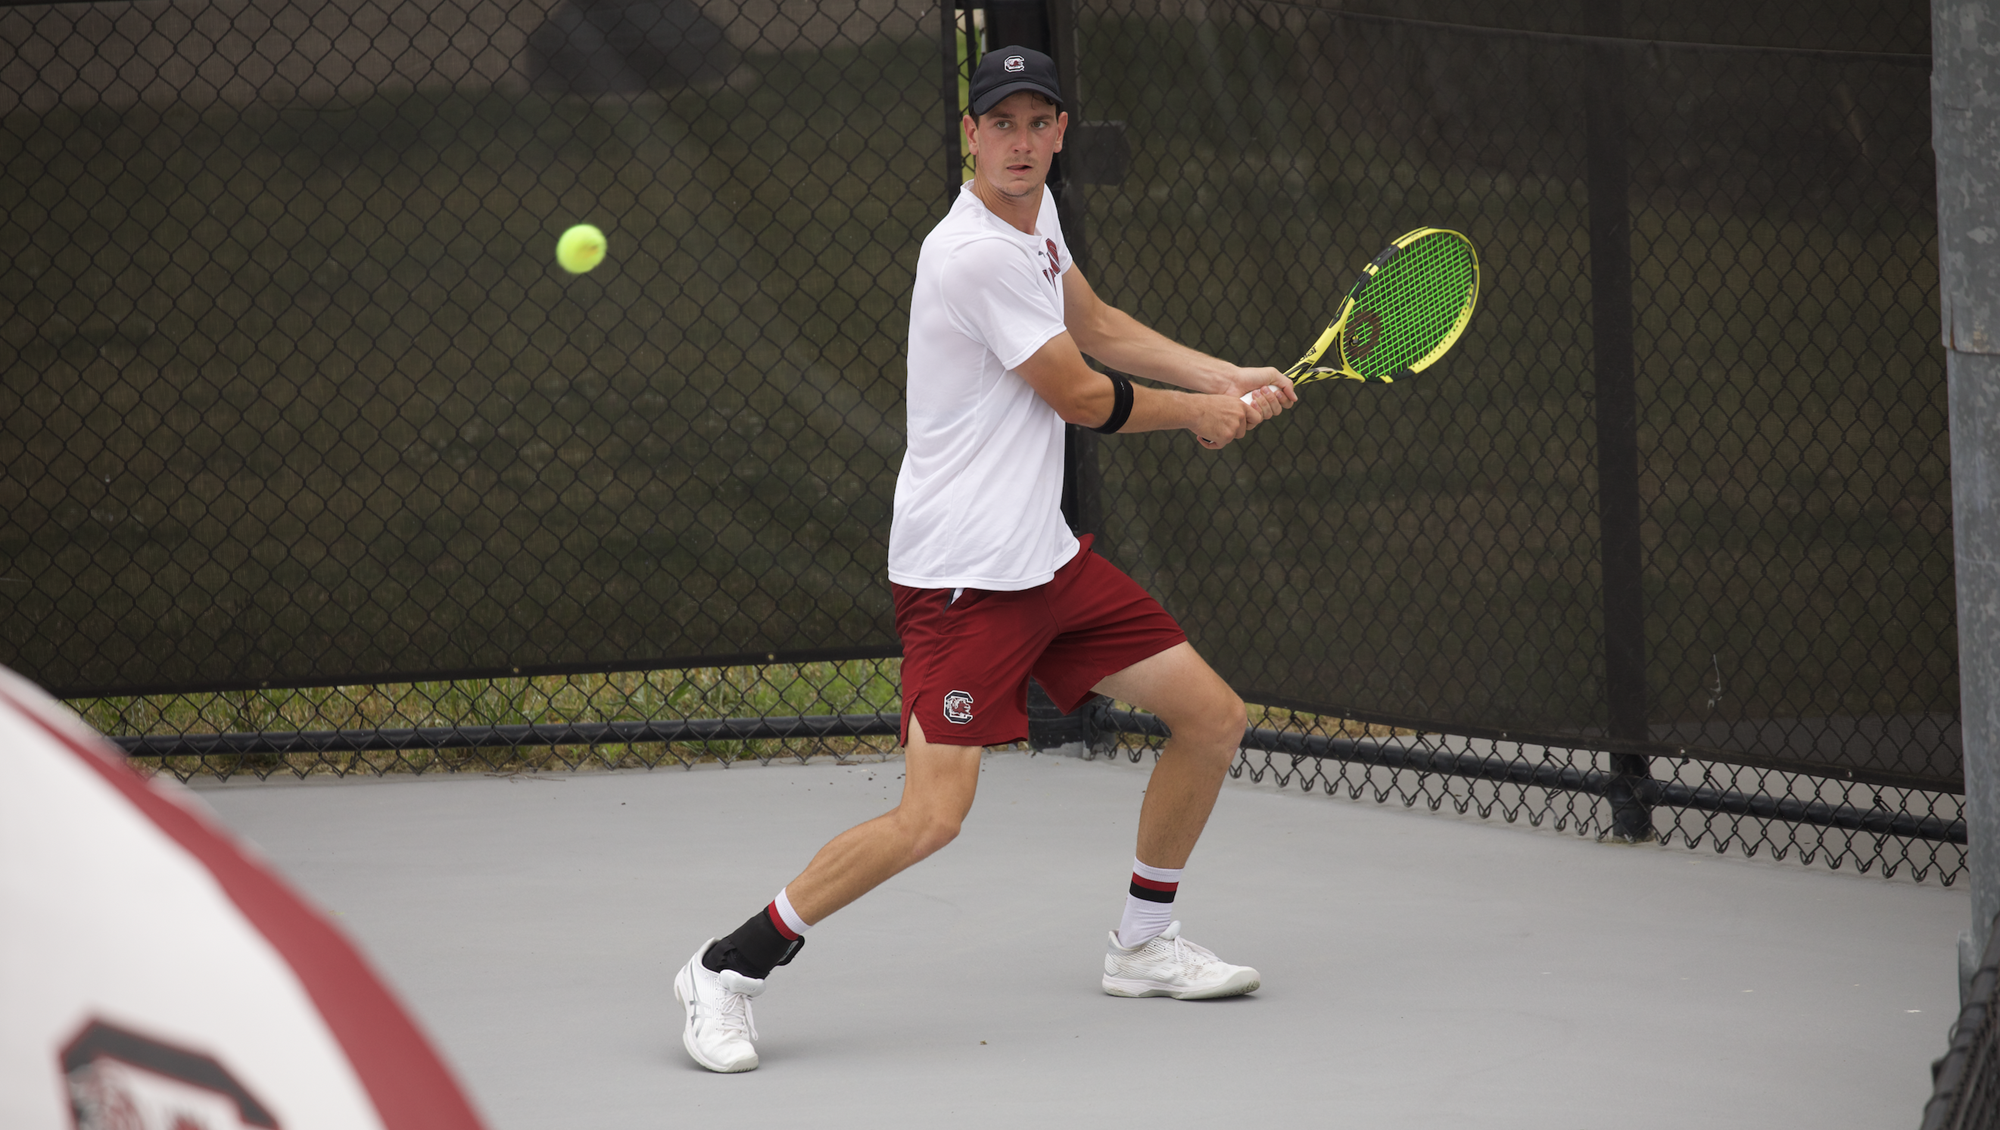 Gamecocks Close Out Play at Gator Fall Invite